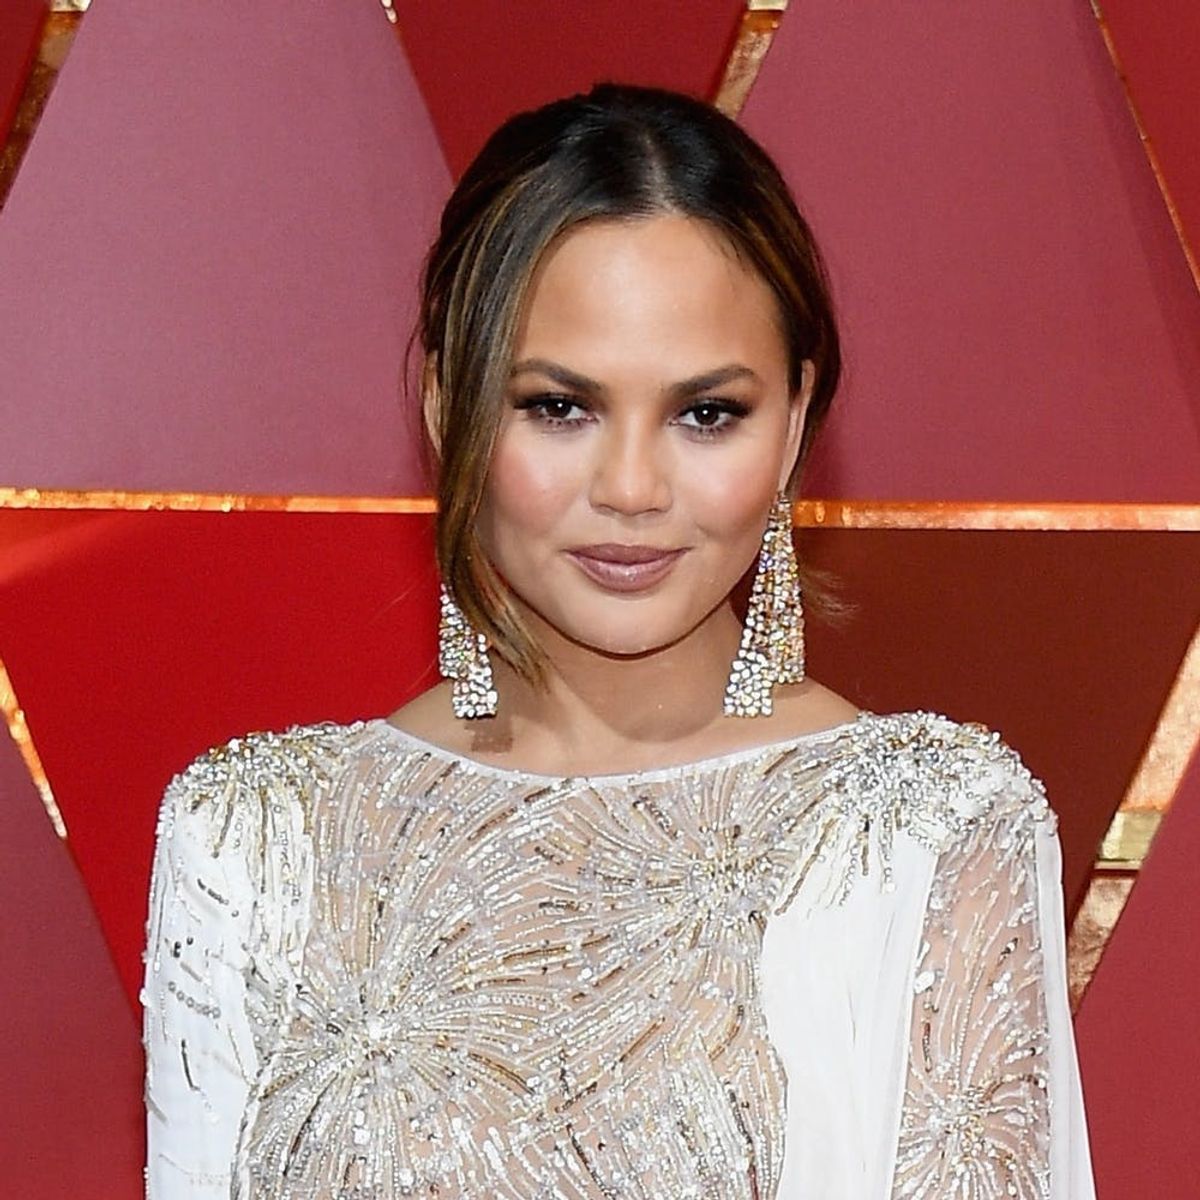 Here’s the Genius Way Chrissy Teigen Covered Up a Leg Burn on the Red Carpet